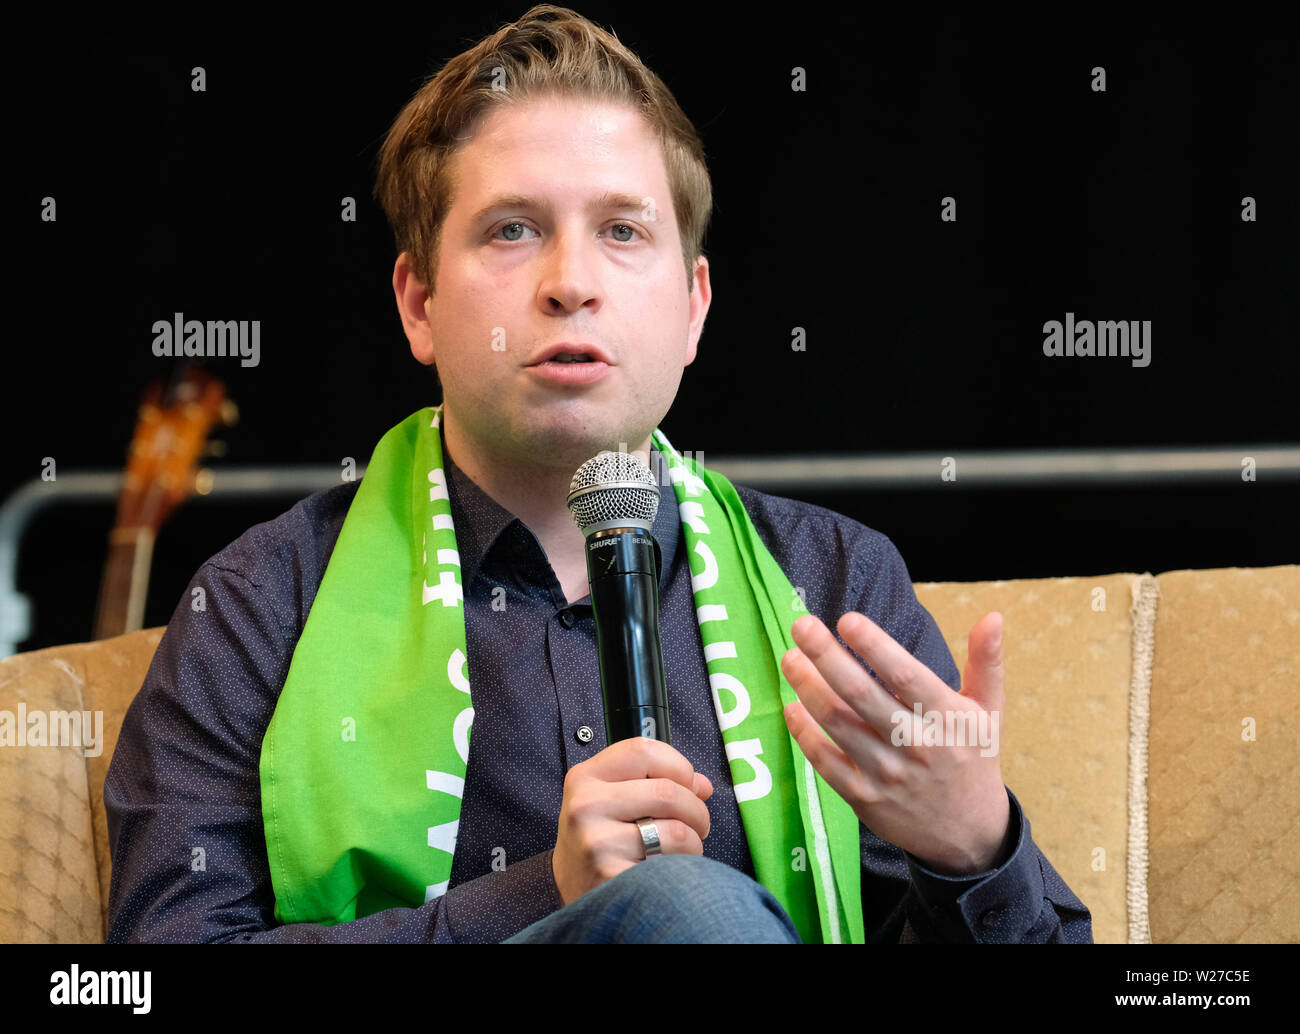 Dortmund, Germany, 21, June 2019: KEVIN KUEHNERT on a podium of the 37th German Protestant Church Congress. Kuehnert (born July 1, 1989 in West Berlin) is a German politician of the SPD Social Democratic Party.. Since 24 November 2017 he is Federal Chairman of the Young Socialists (Juso) Stock Photo